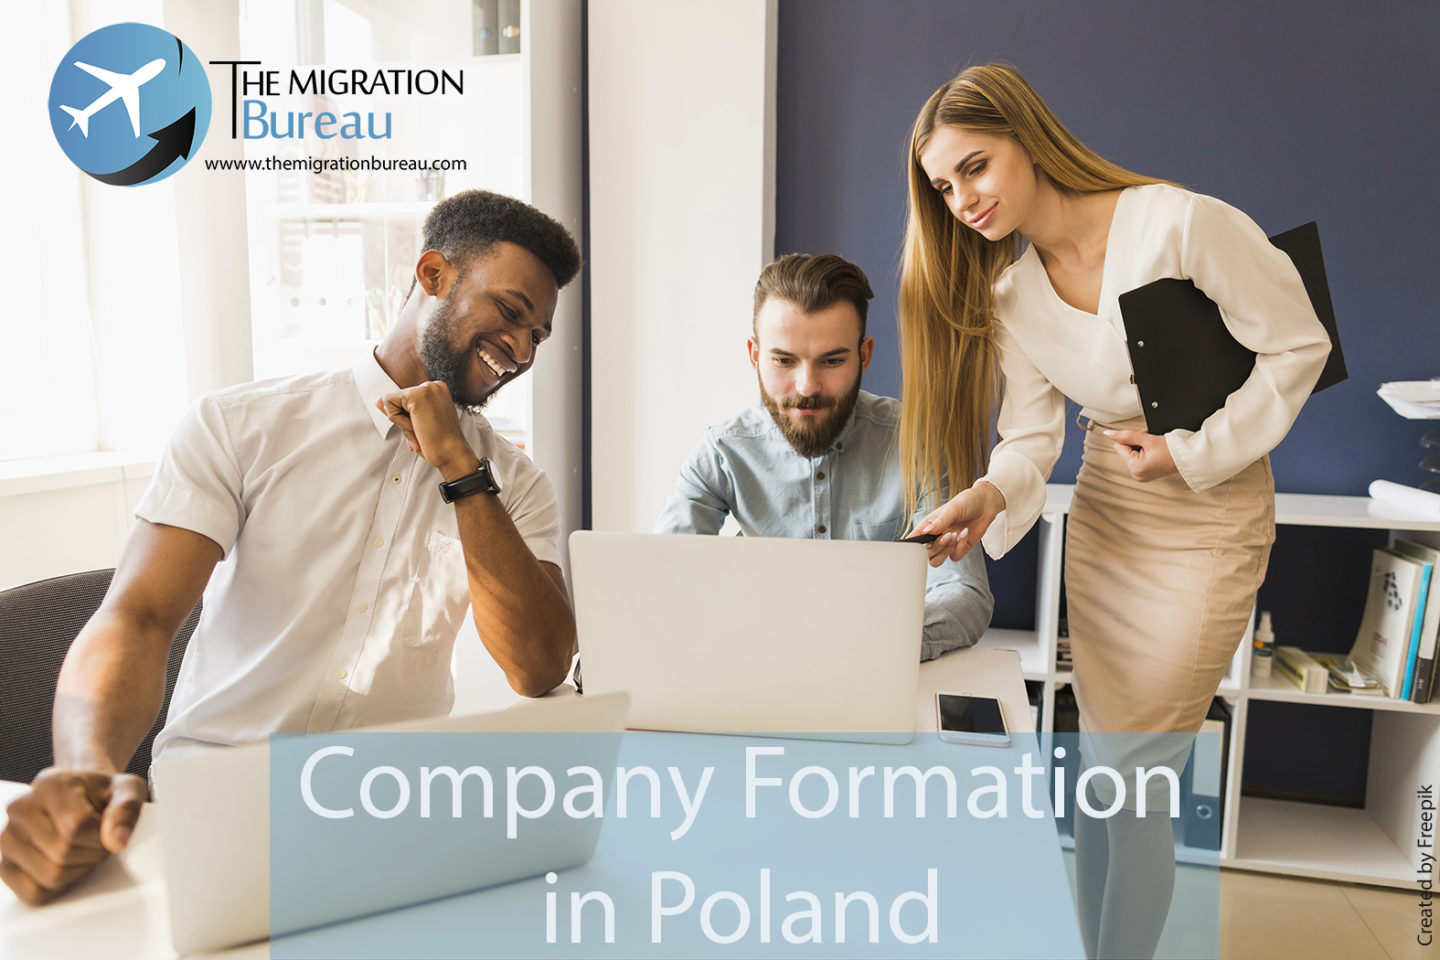 International cooperation, assistance in establishing a company in Poland and its branches for foreigners.